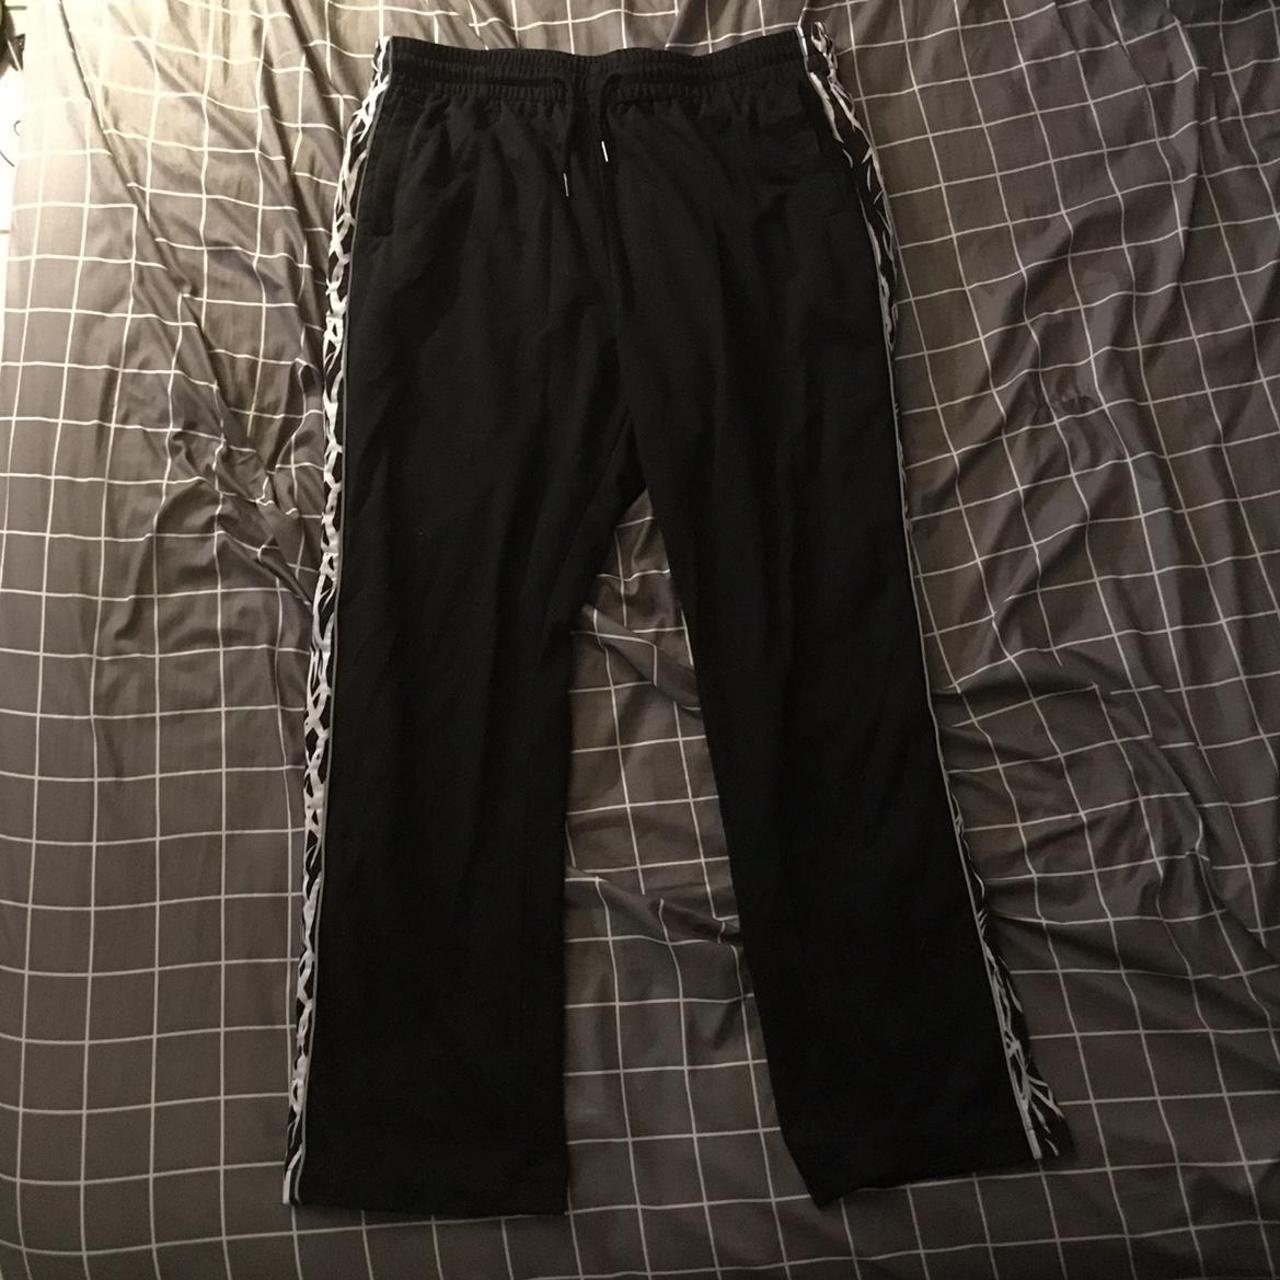 SHEIN Men's Black and White Joggers-tracksuits | Depop